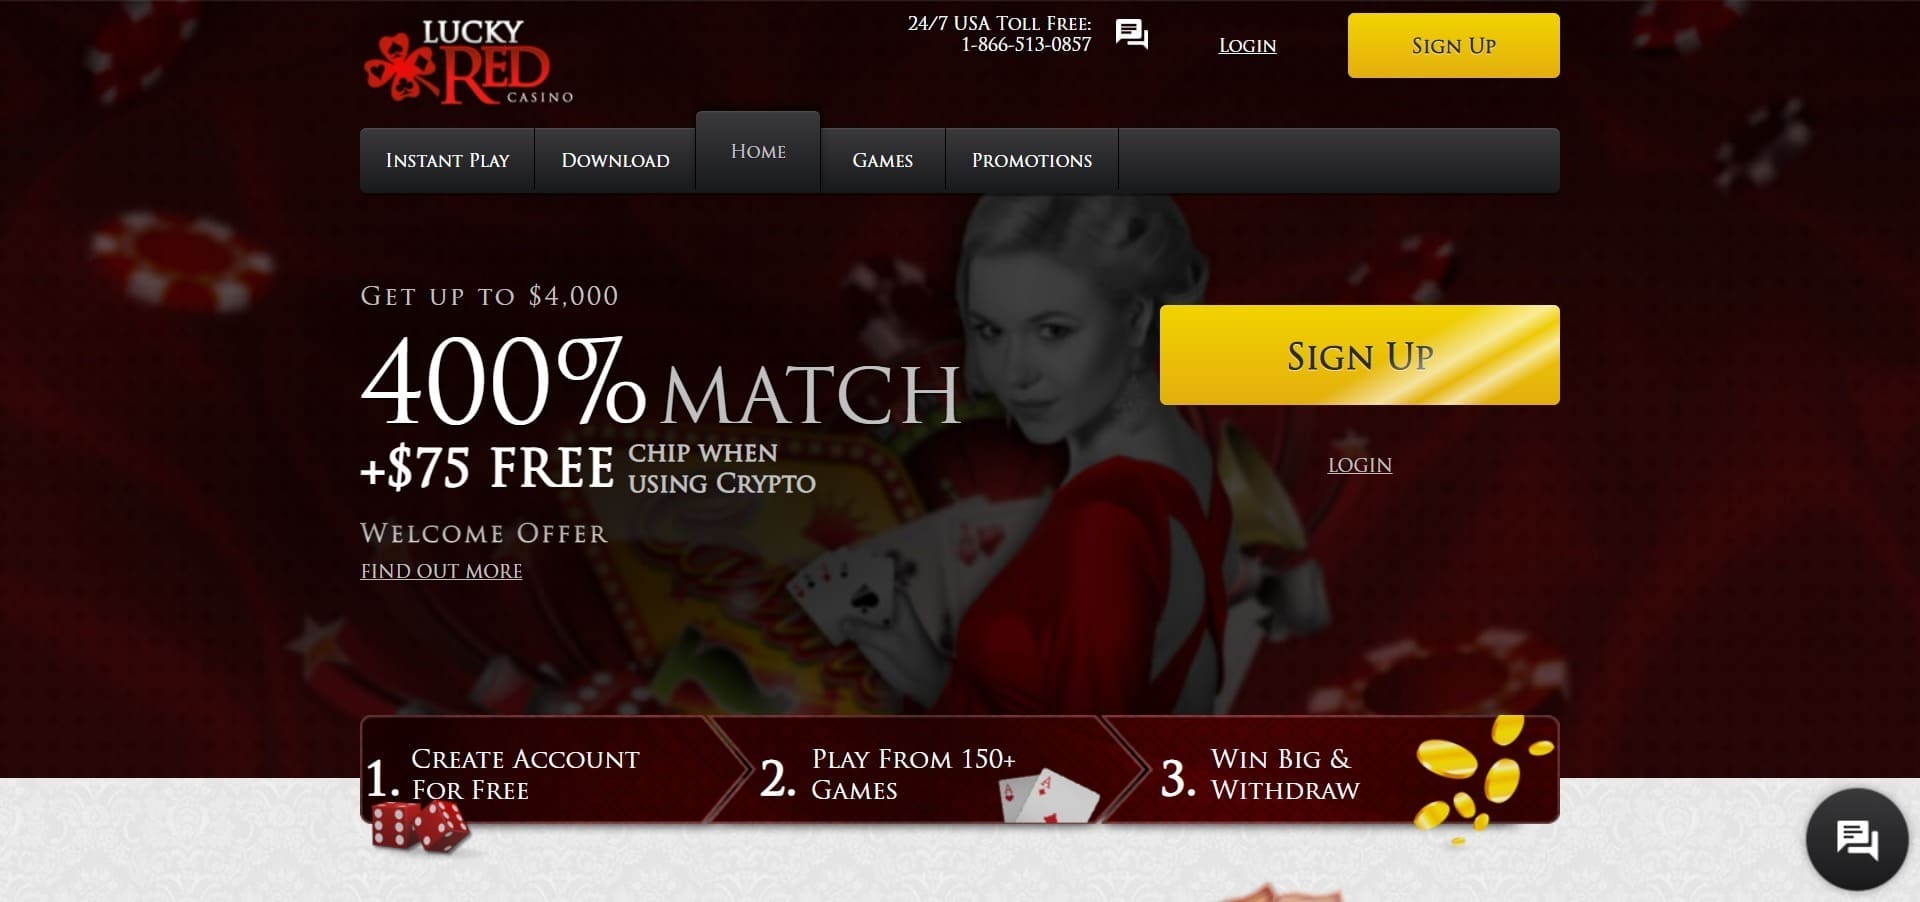 Official website of the Lucky Red Casino